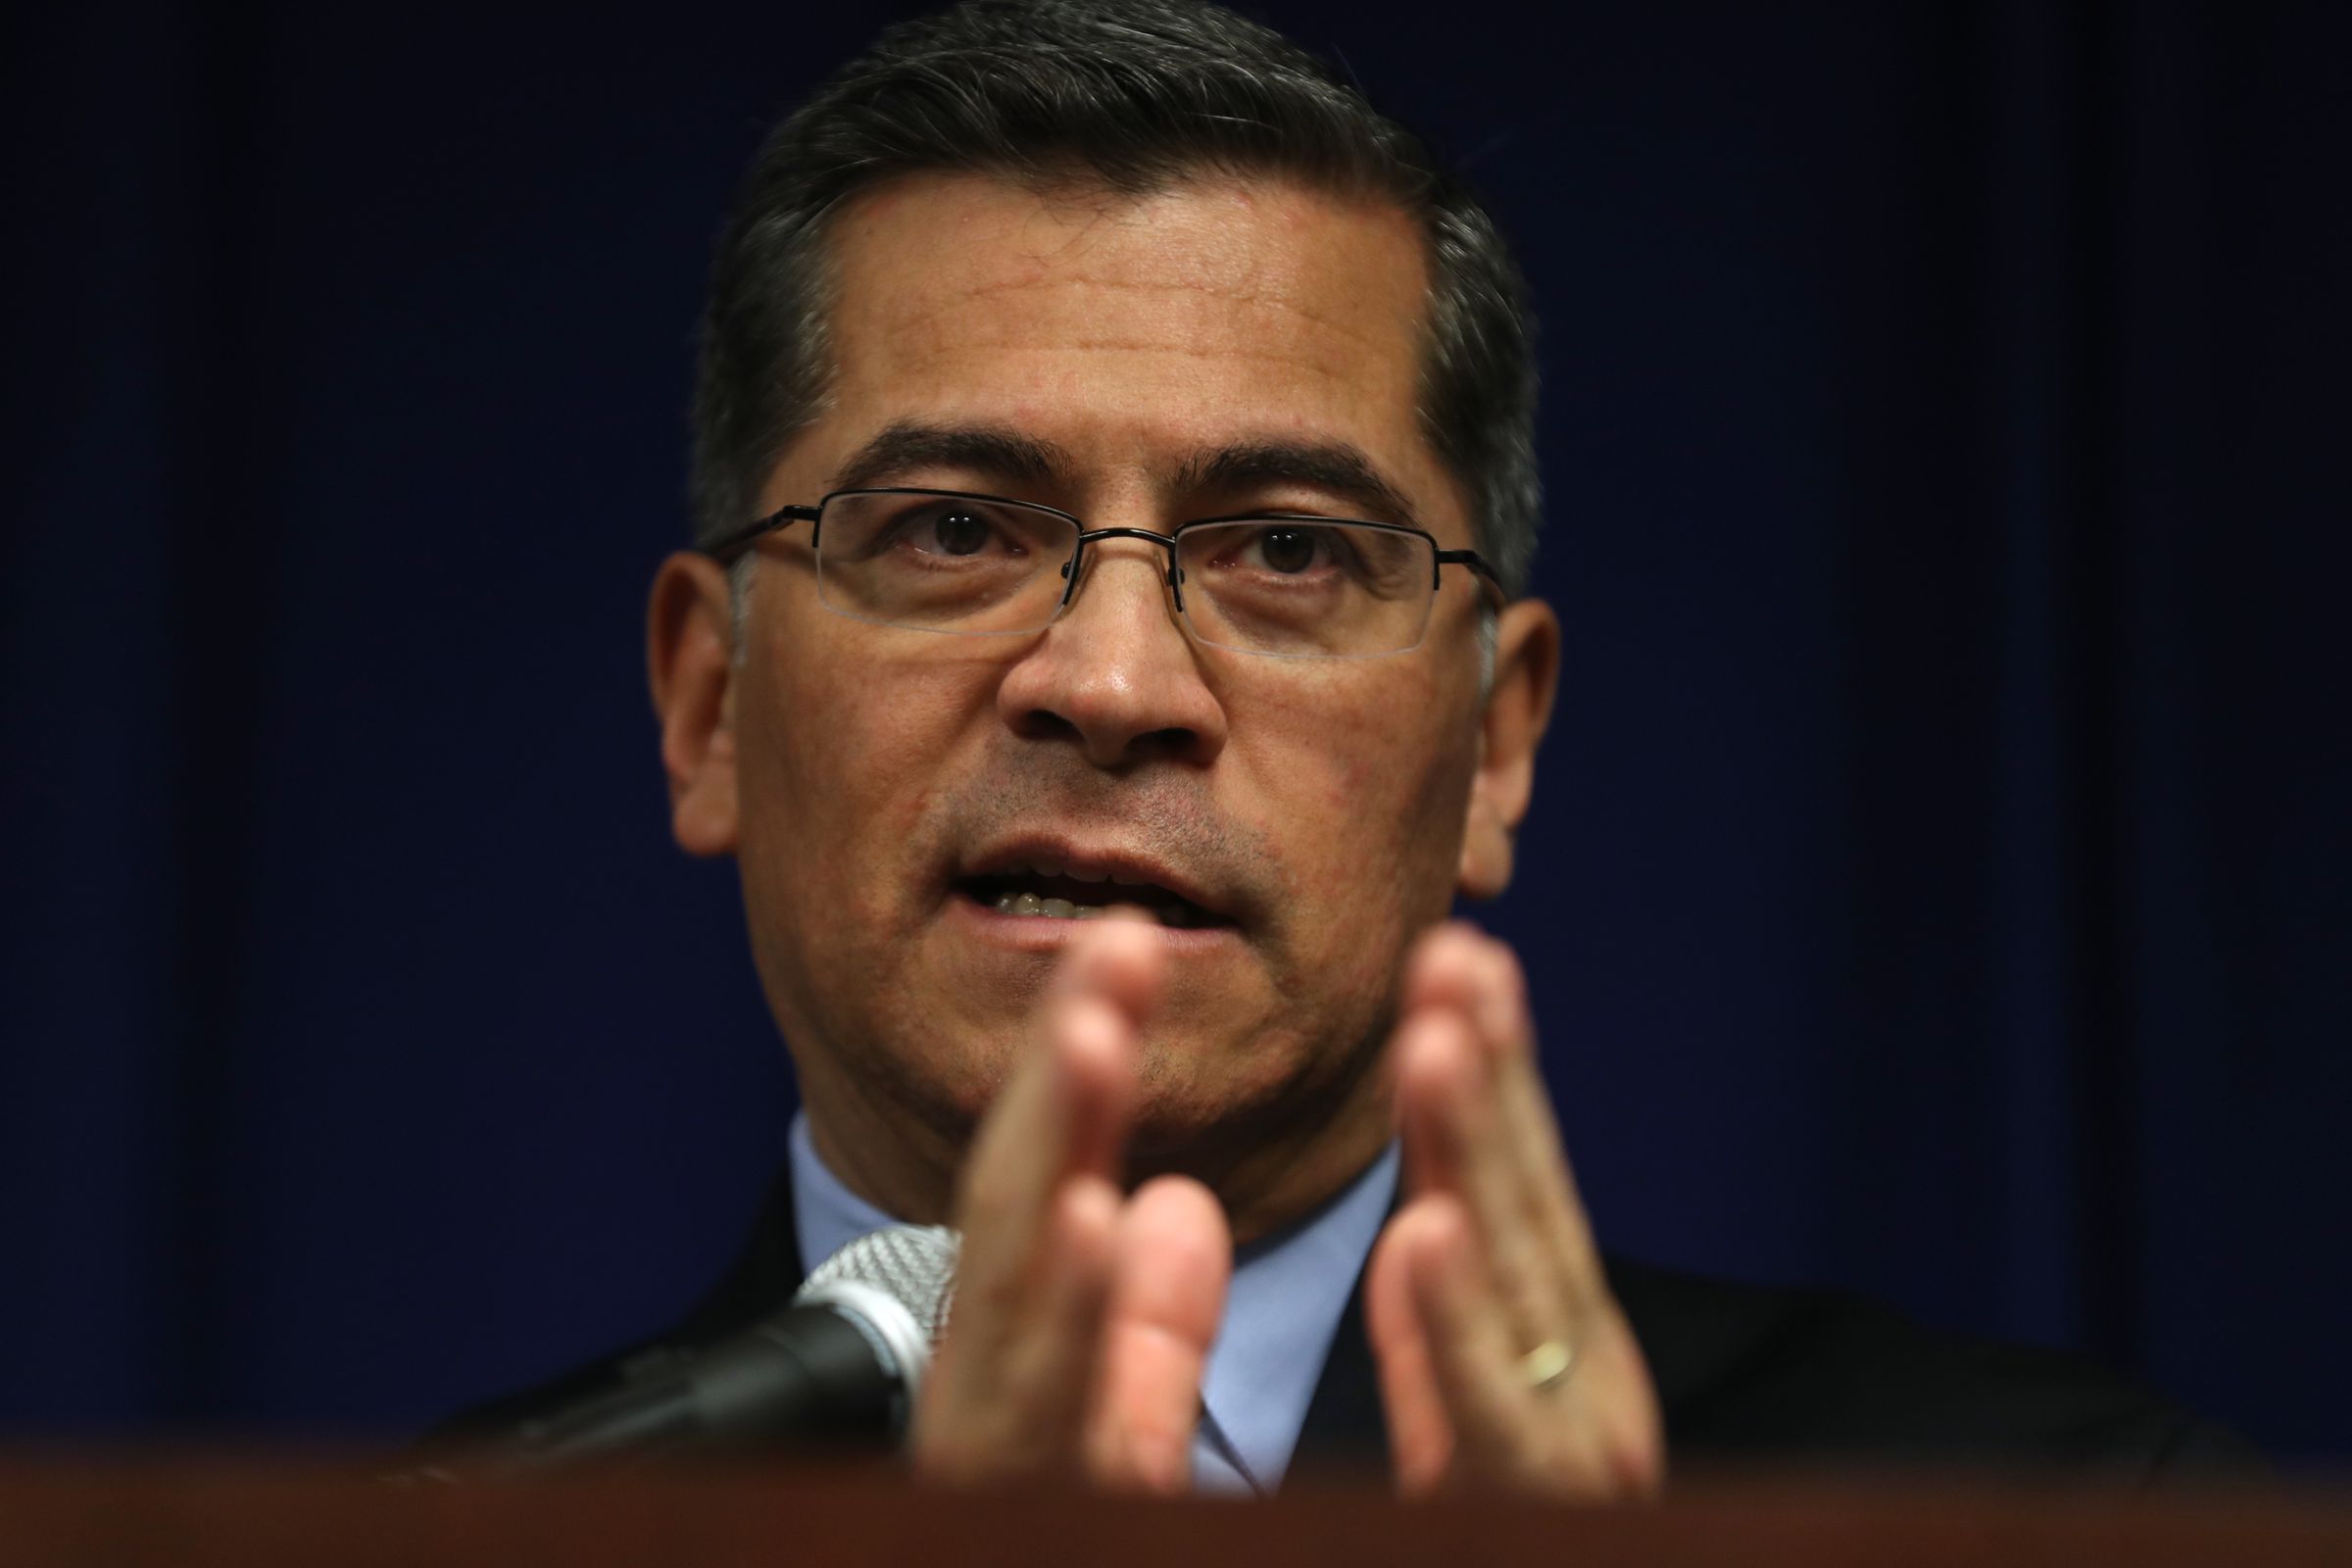 California Attorney General Xavier Becerra Announces Results Of His Office’s Investigation Into Stephon Clark Killing